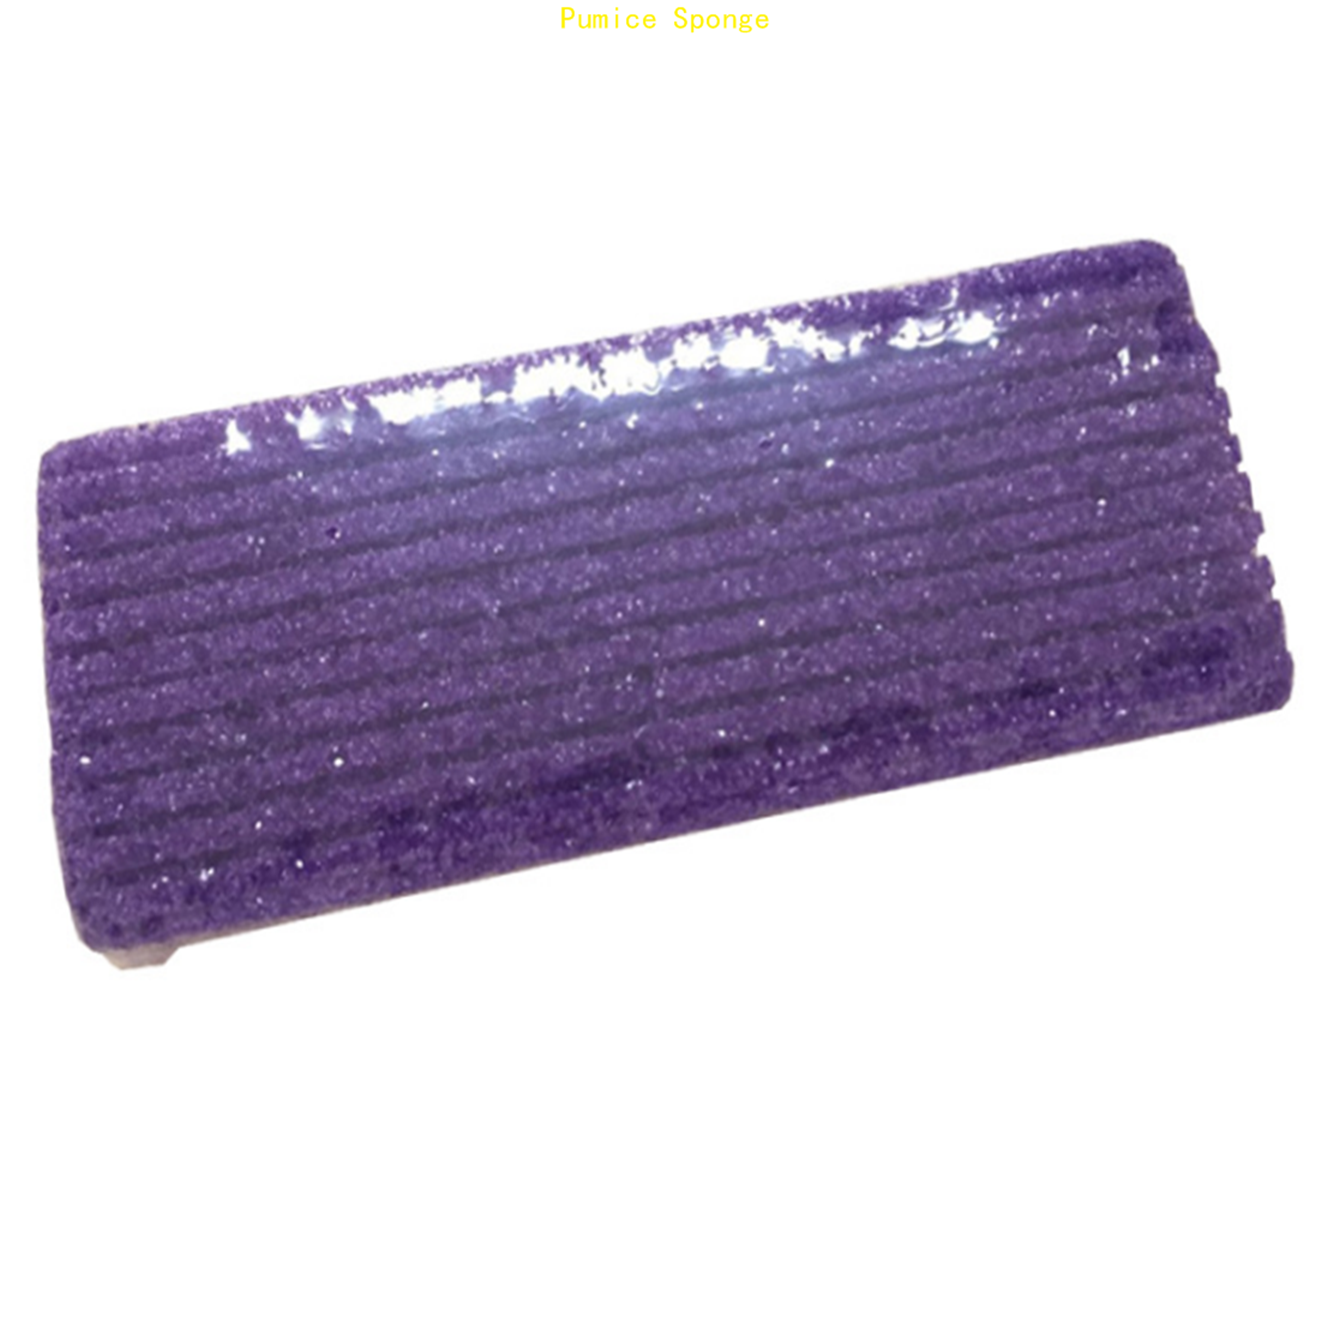 nail salon supply 2 in 1 pumice sponges